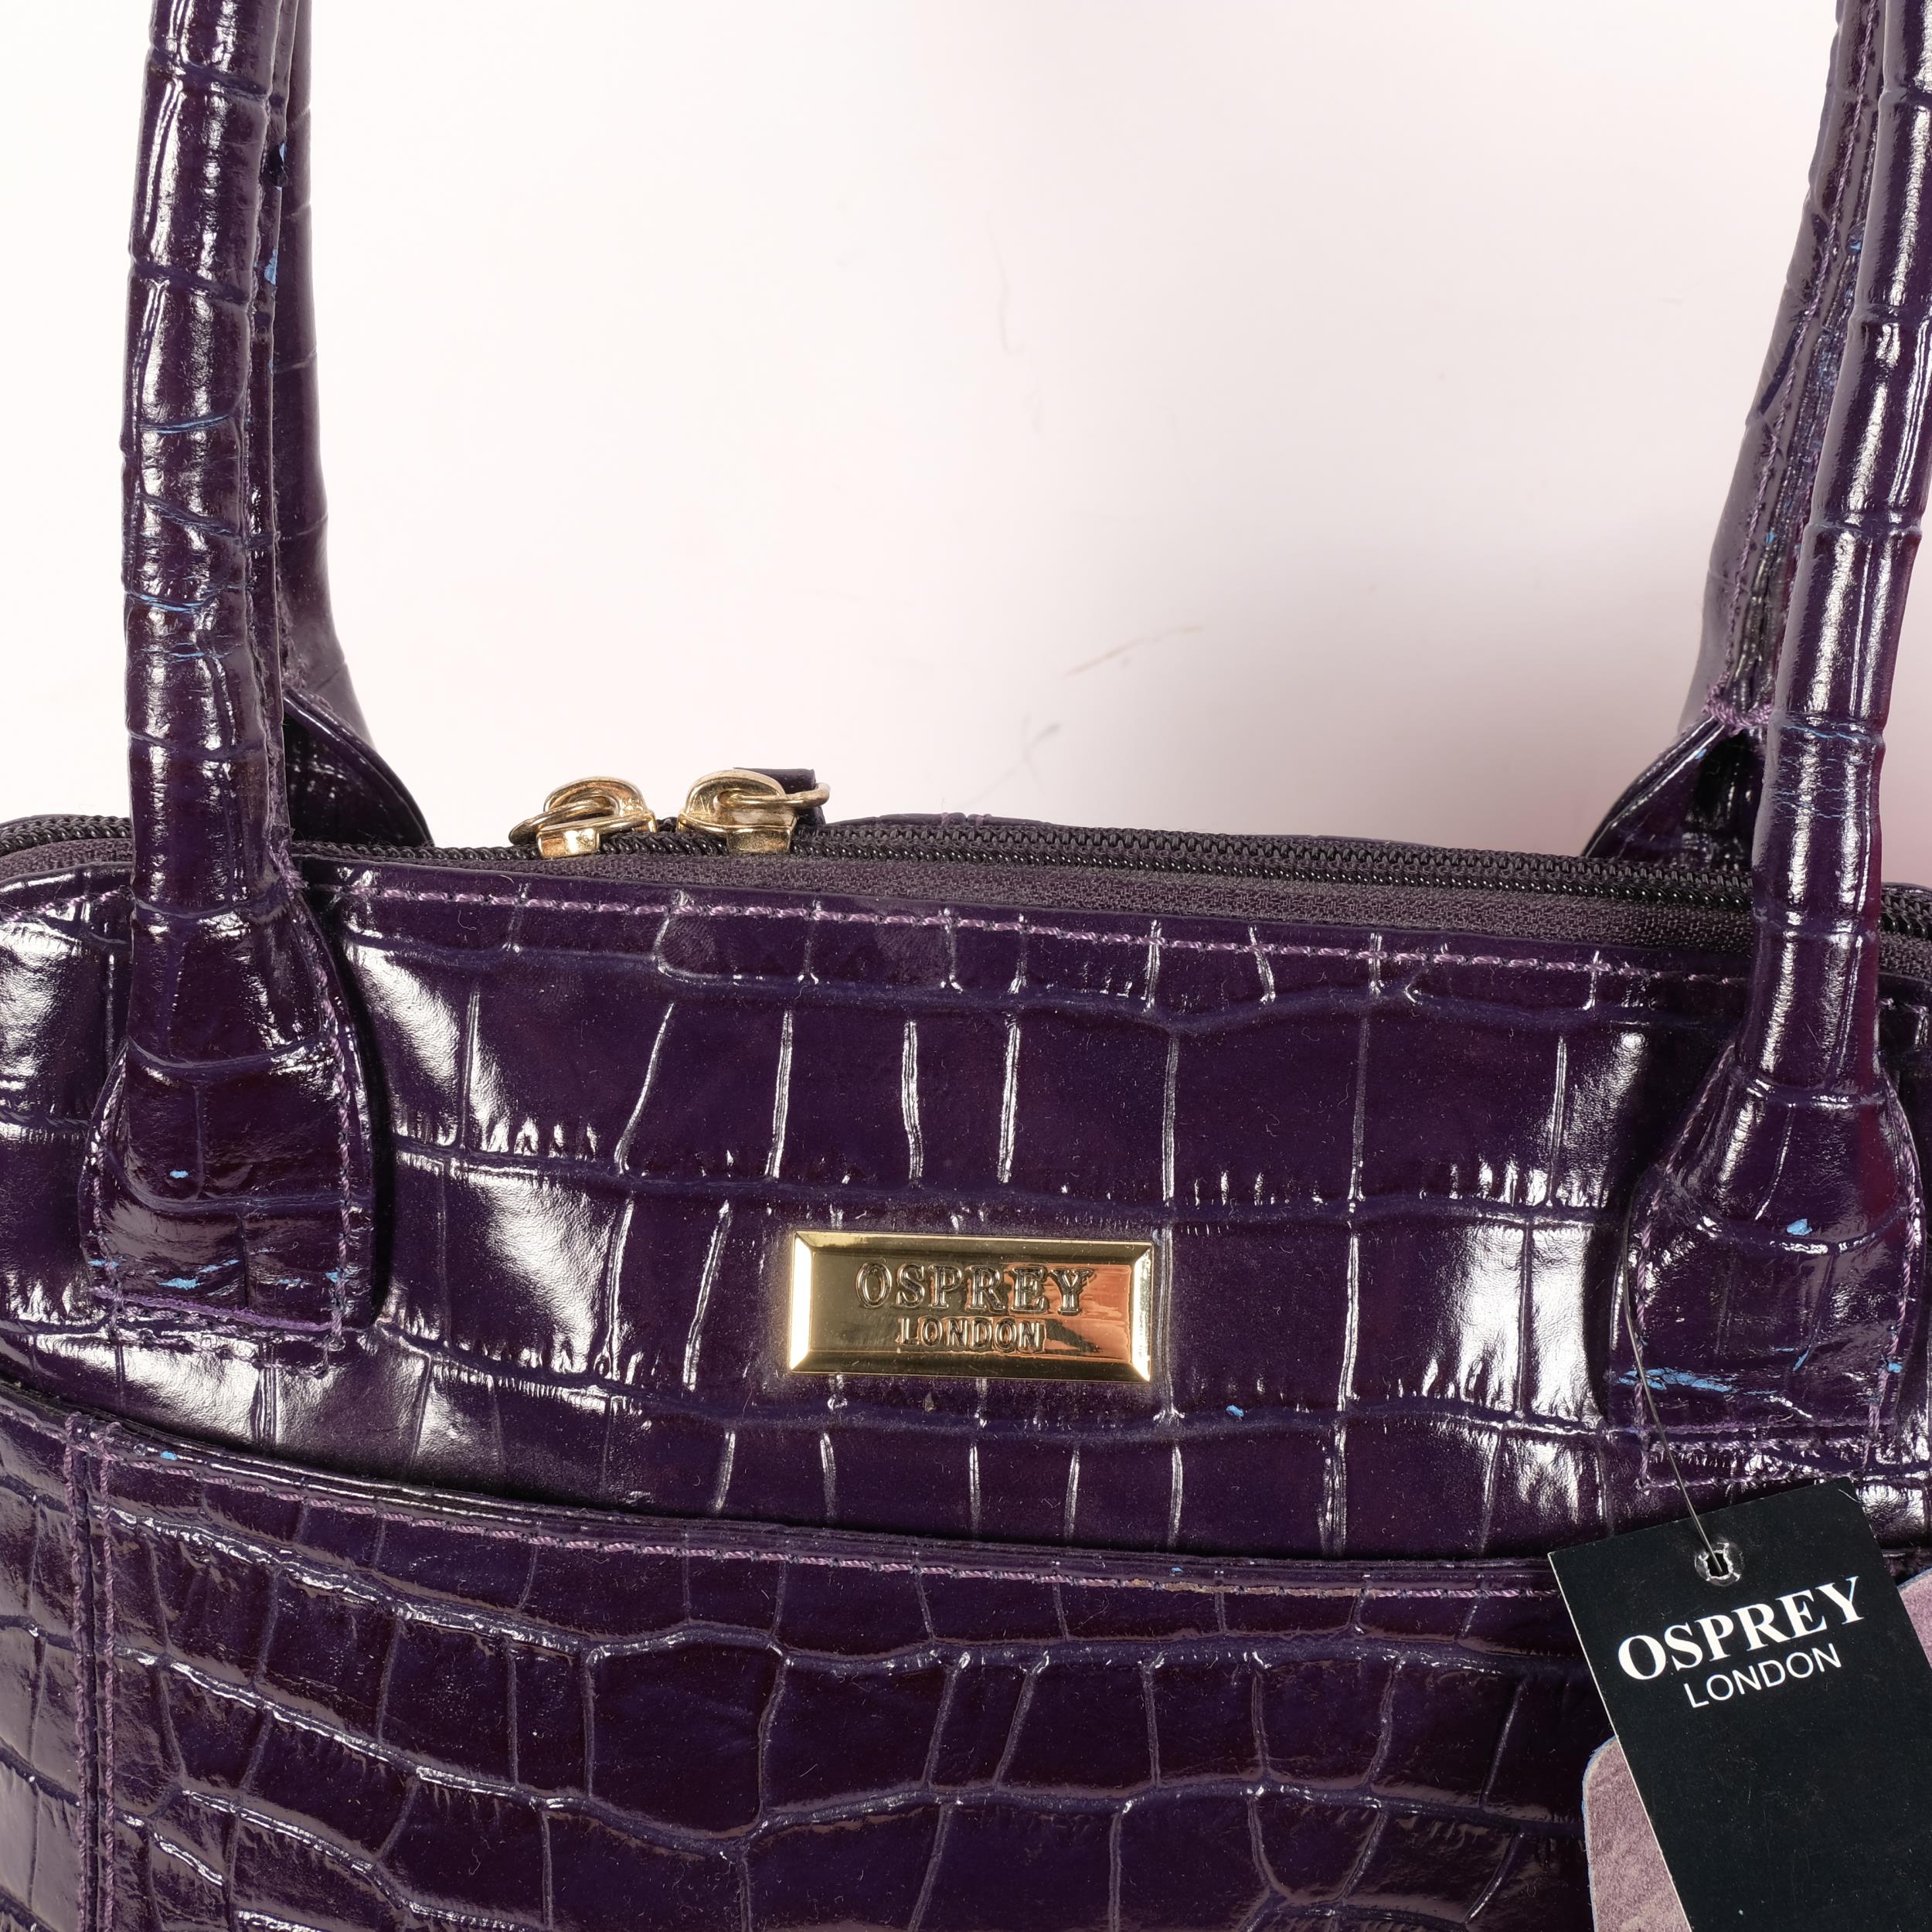 2 similar Osprey London leather handbags, 1 red and 1 purple, both with associated dust packaging - Image 2 of 2